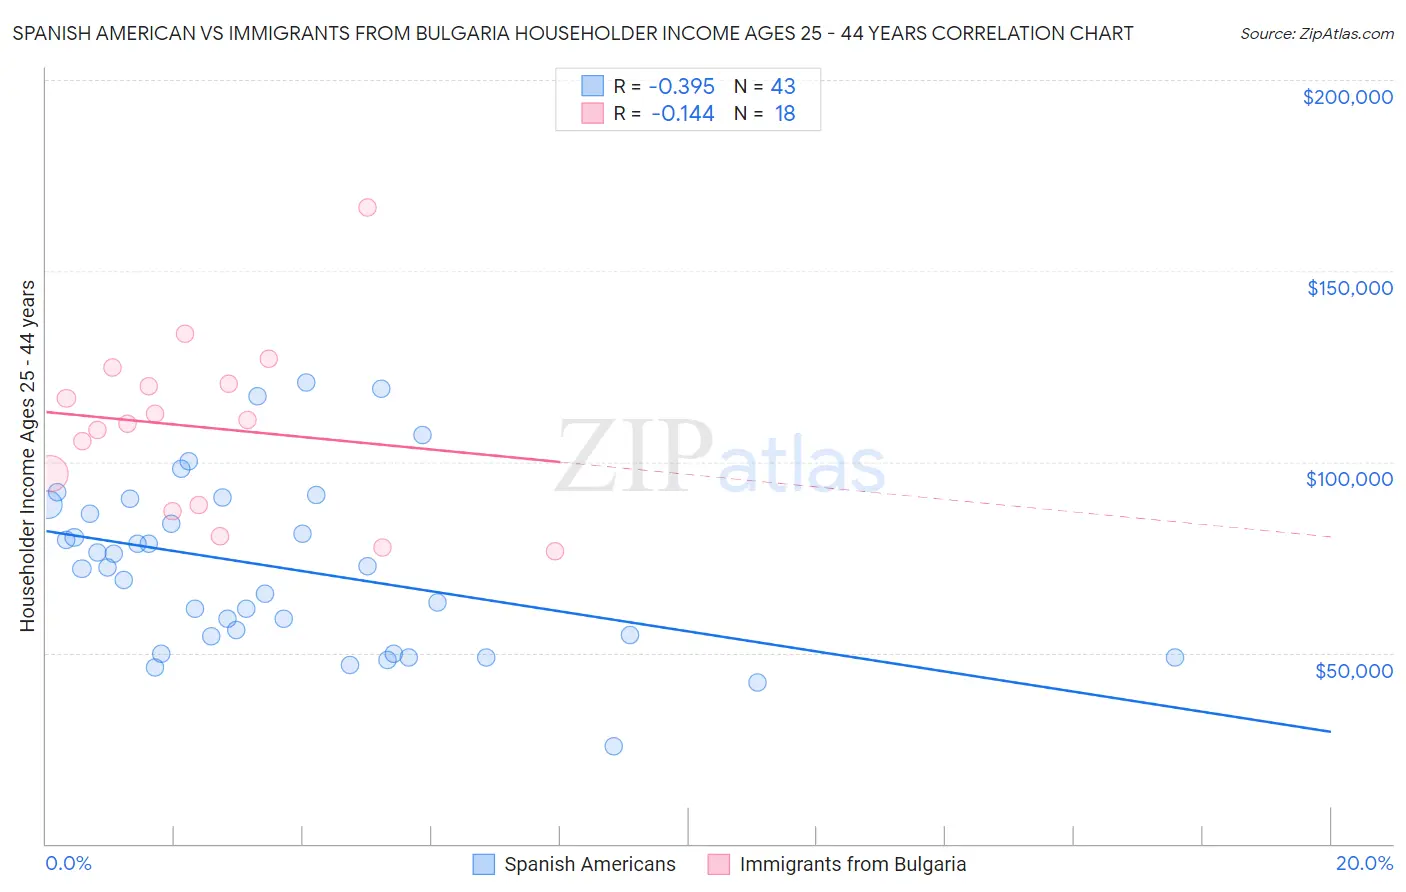 Spanish American vs Immigrants from Bulgaria Householder Income Ages 25 - 44 years